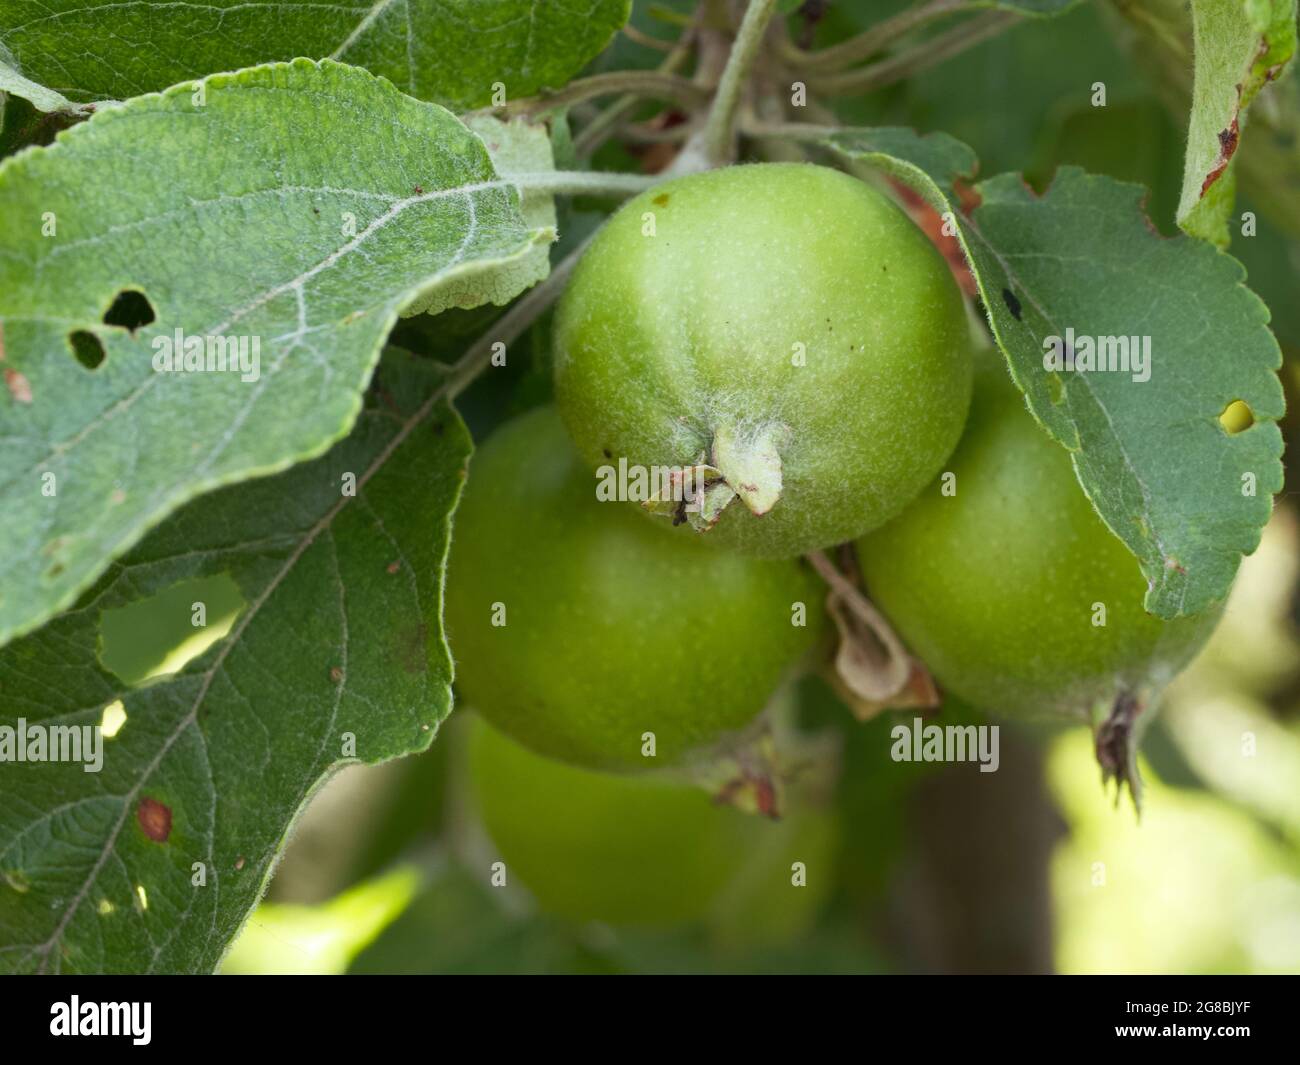 An unripe apple on a tree branch, close-up. An apple is an edible fruit produced by an apple tree (Malus domestica). Stock Photo